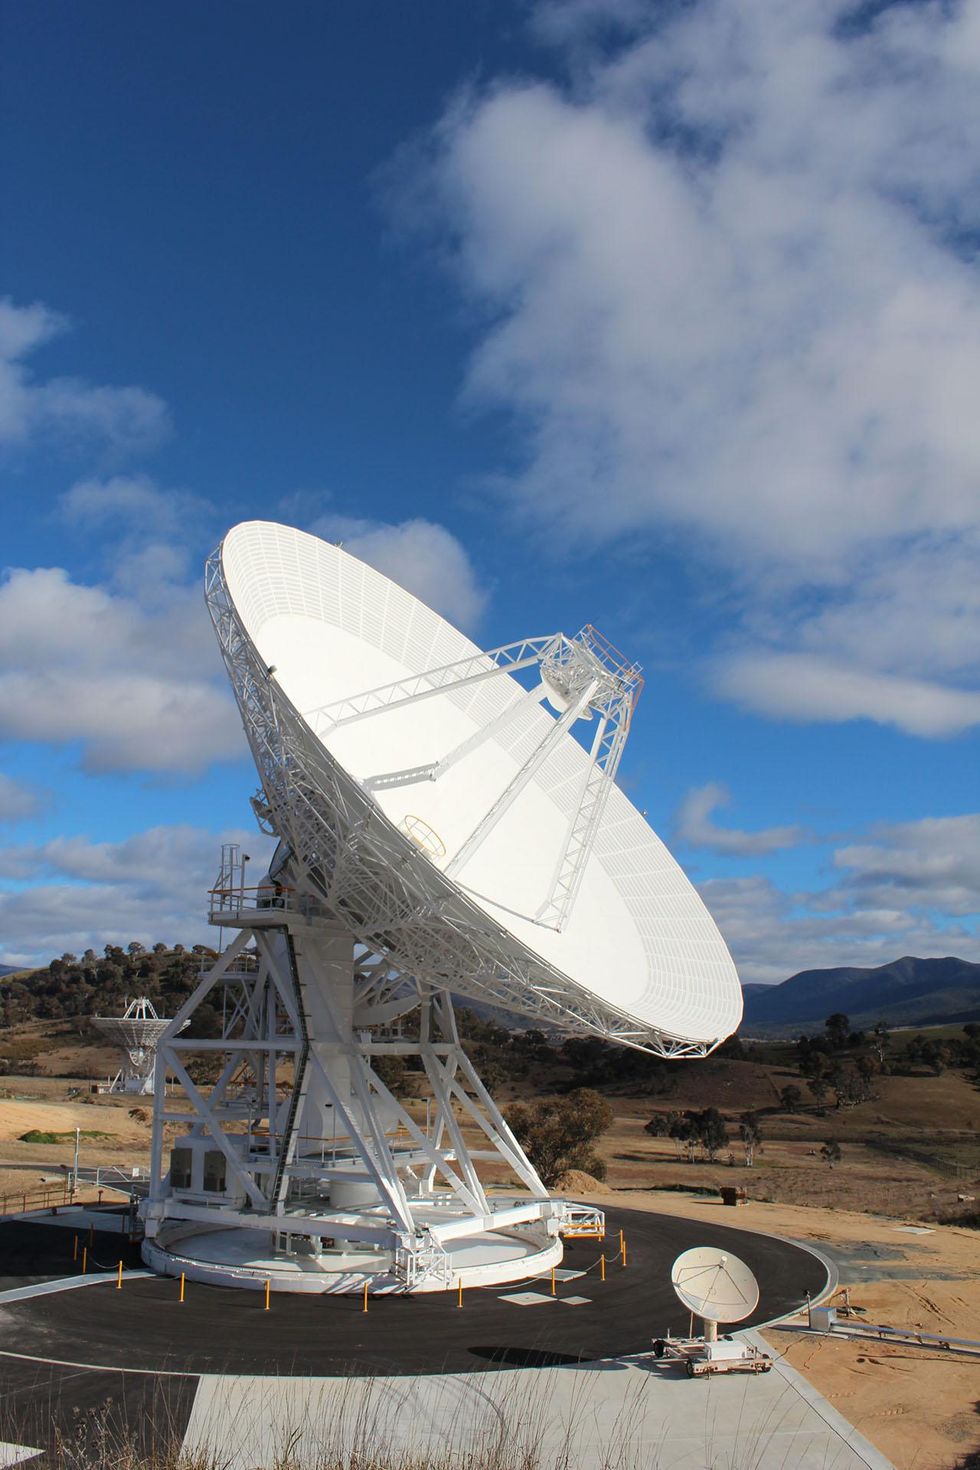 A photograph of a large radio antenna dish in front of a blue sky.